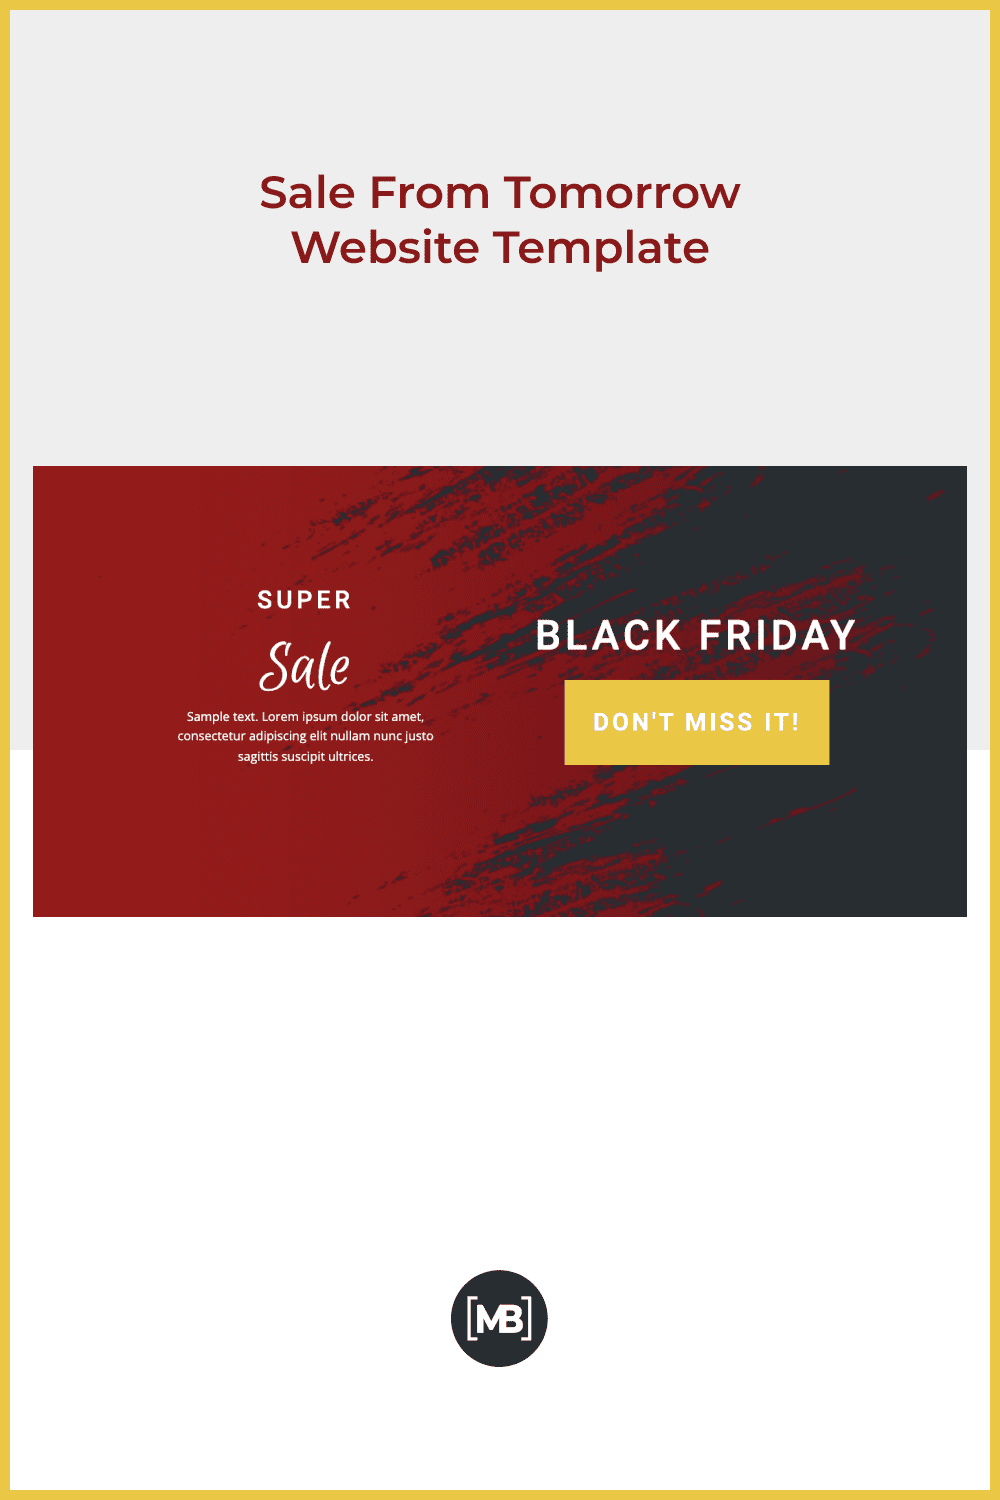 Dark Red and Grey Website Template for Black Friday Promotions.